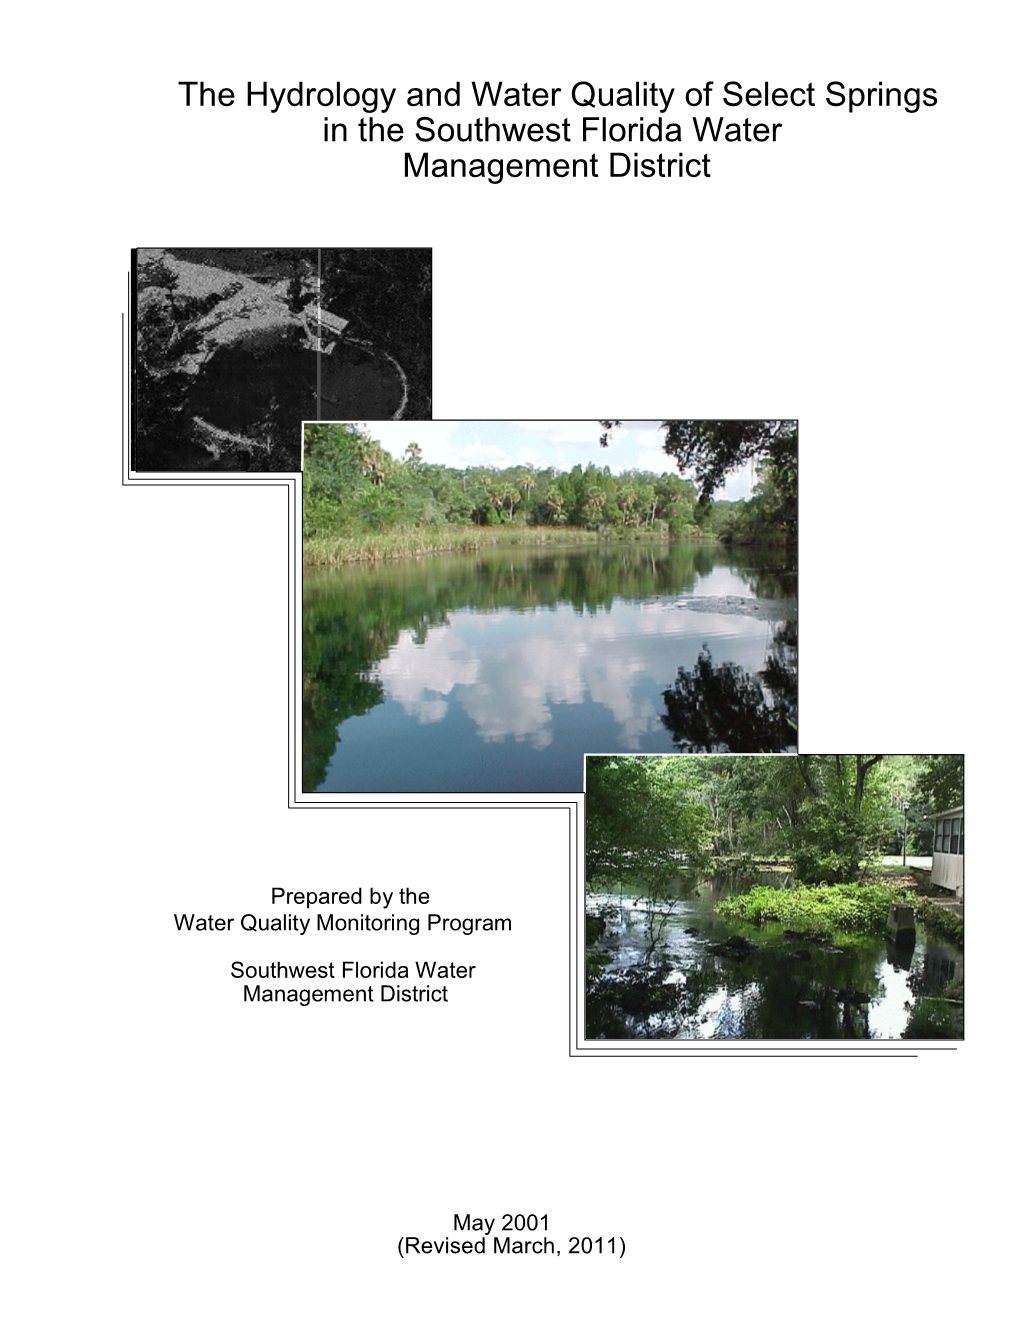 The Hydrology and Water Quality of Select Springs in the Southwest Florida Water Management District